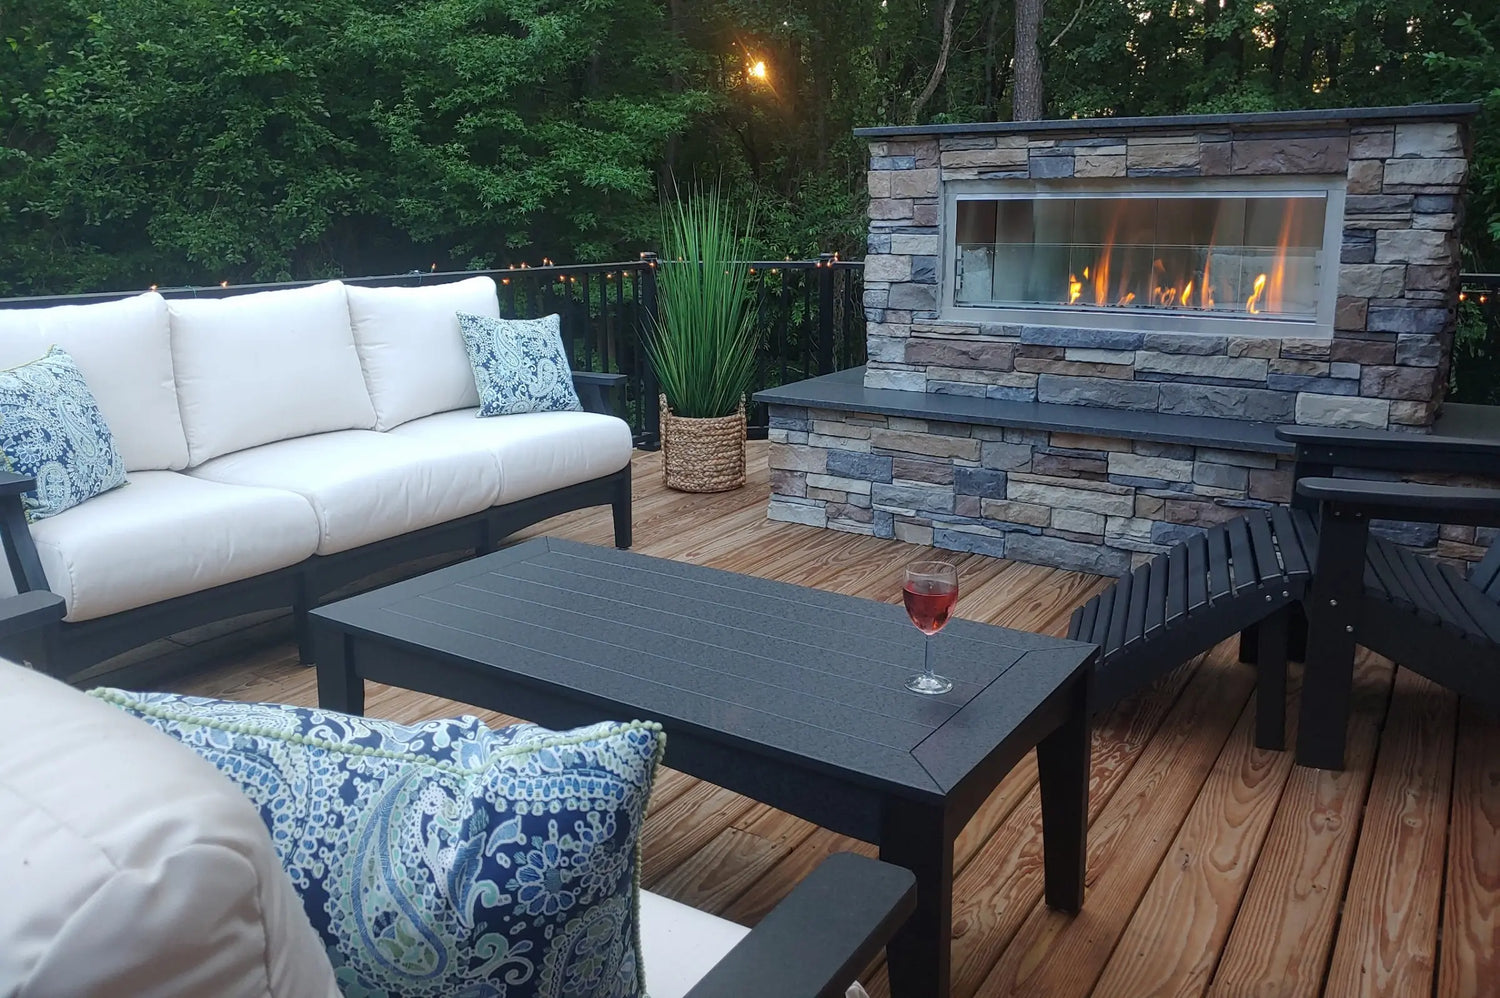 A view setting of outdoor furniture around an outdoor fireplace